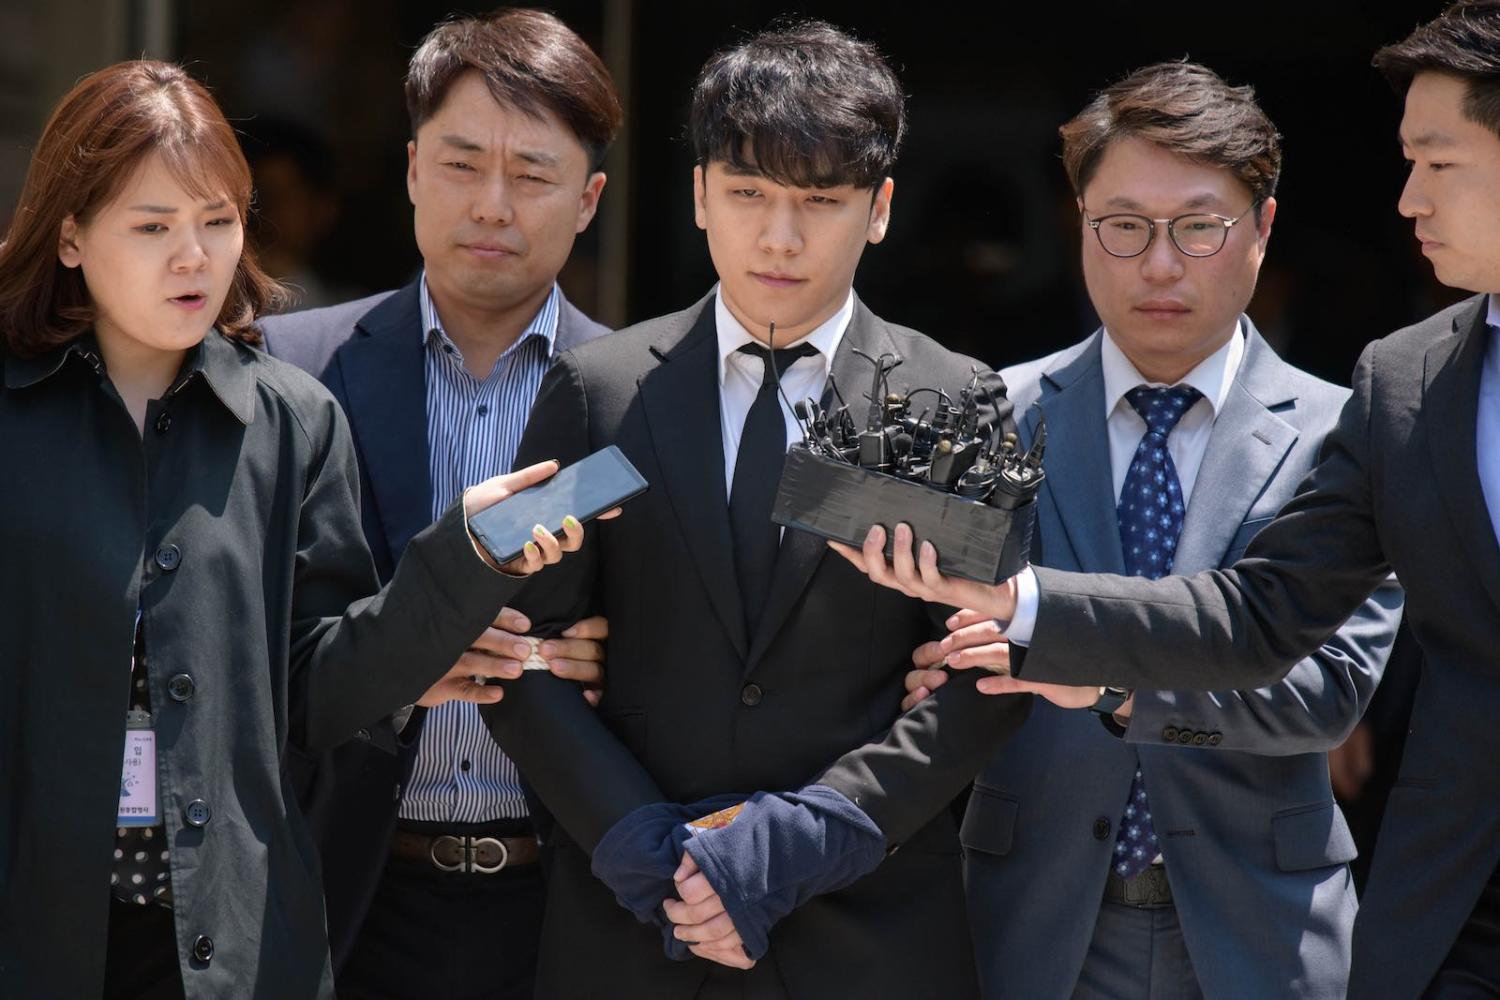 1500px x 1000px - The Burning Sun scandal that torched South Korea's elites | Lowy Institute